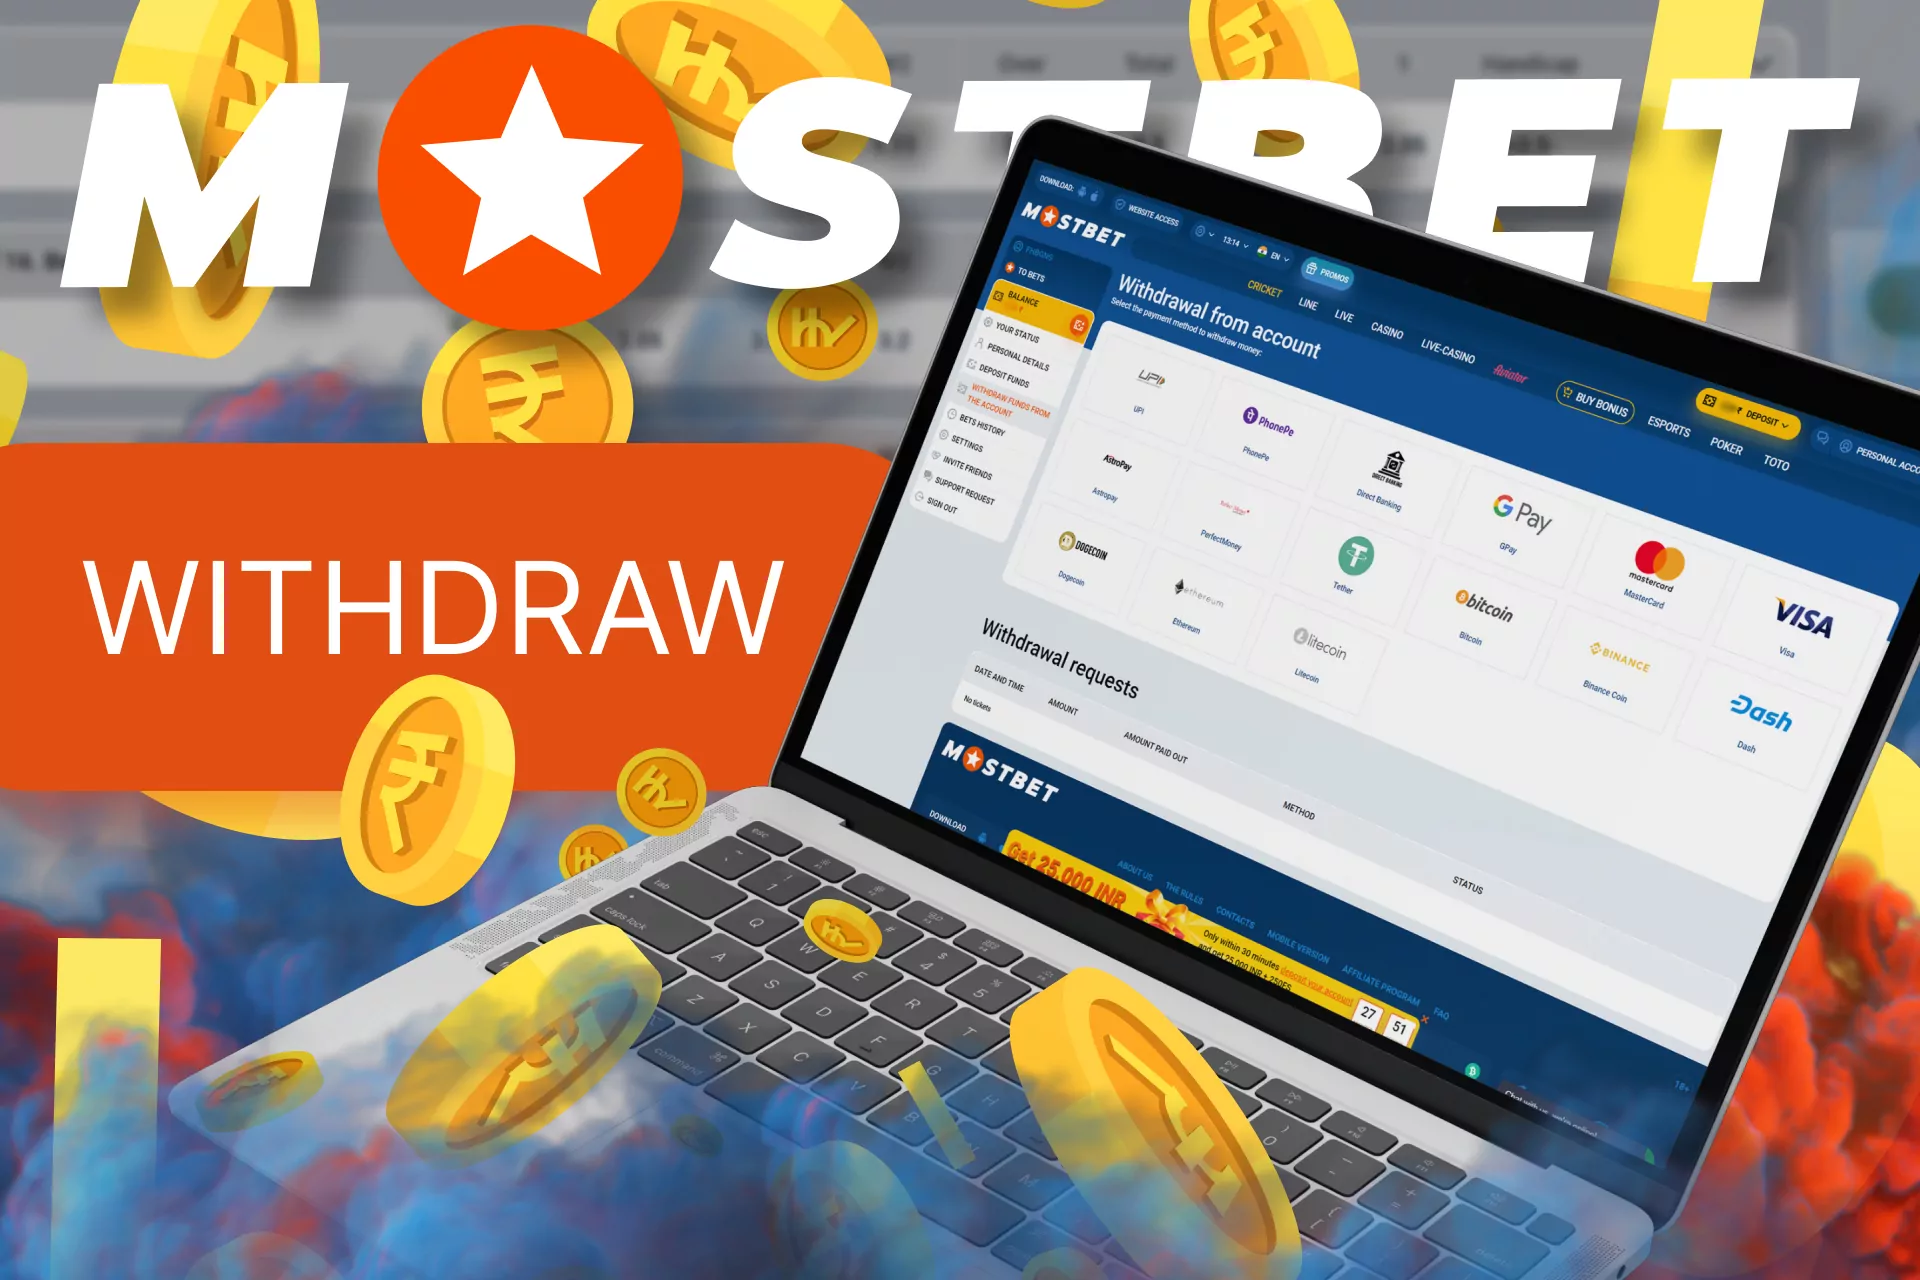 Find out how easy it is to withdraw money from Mostbet.